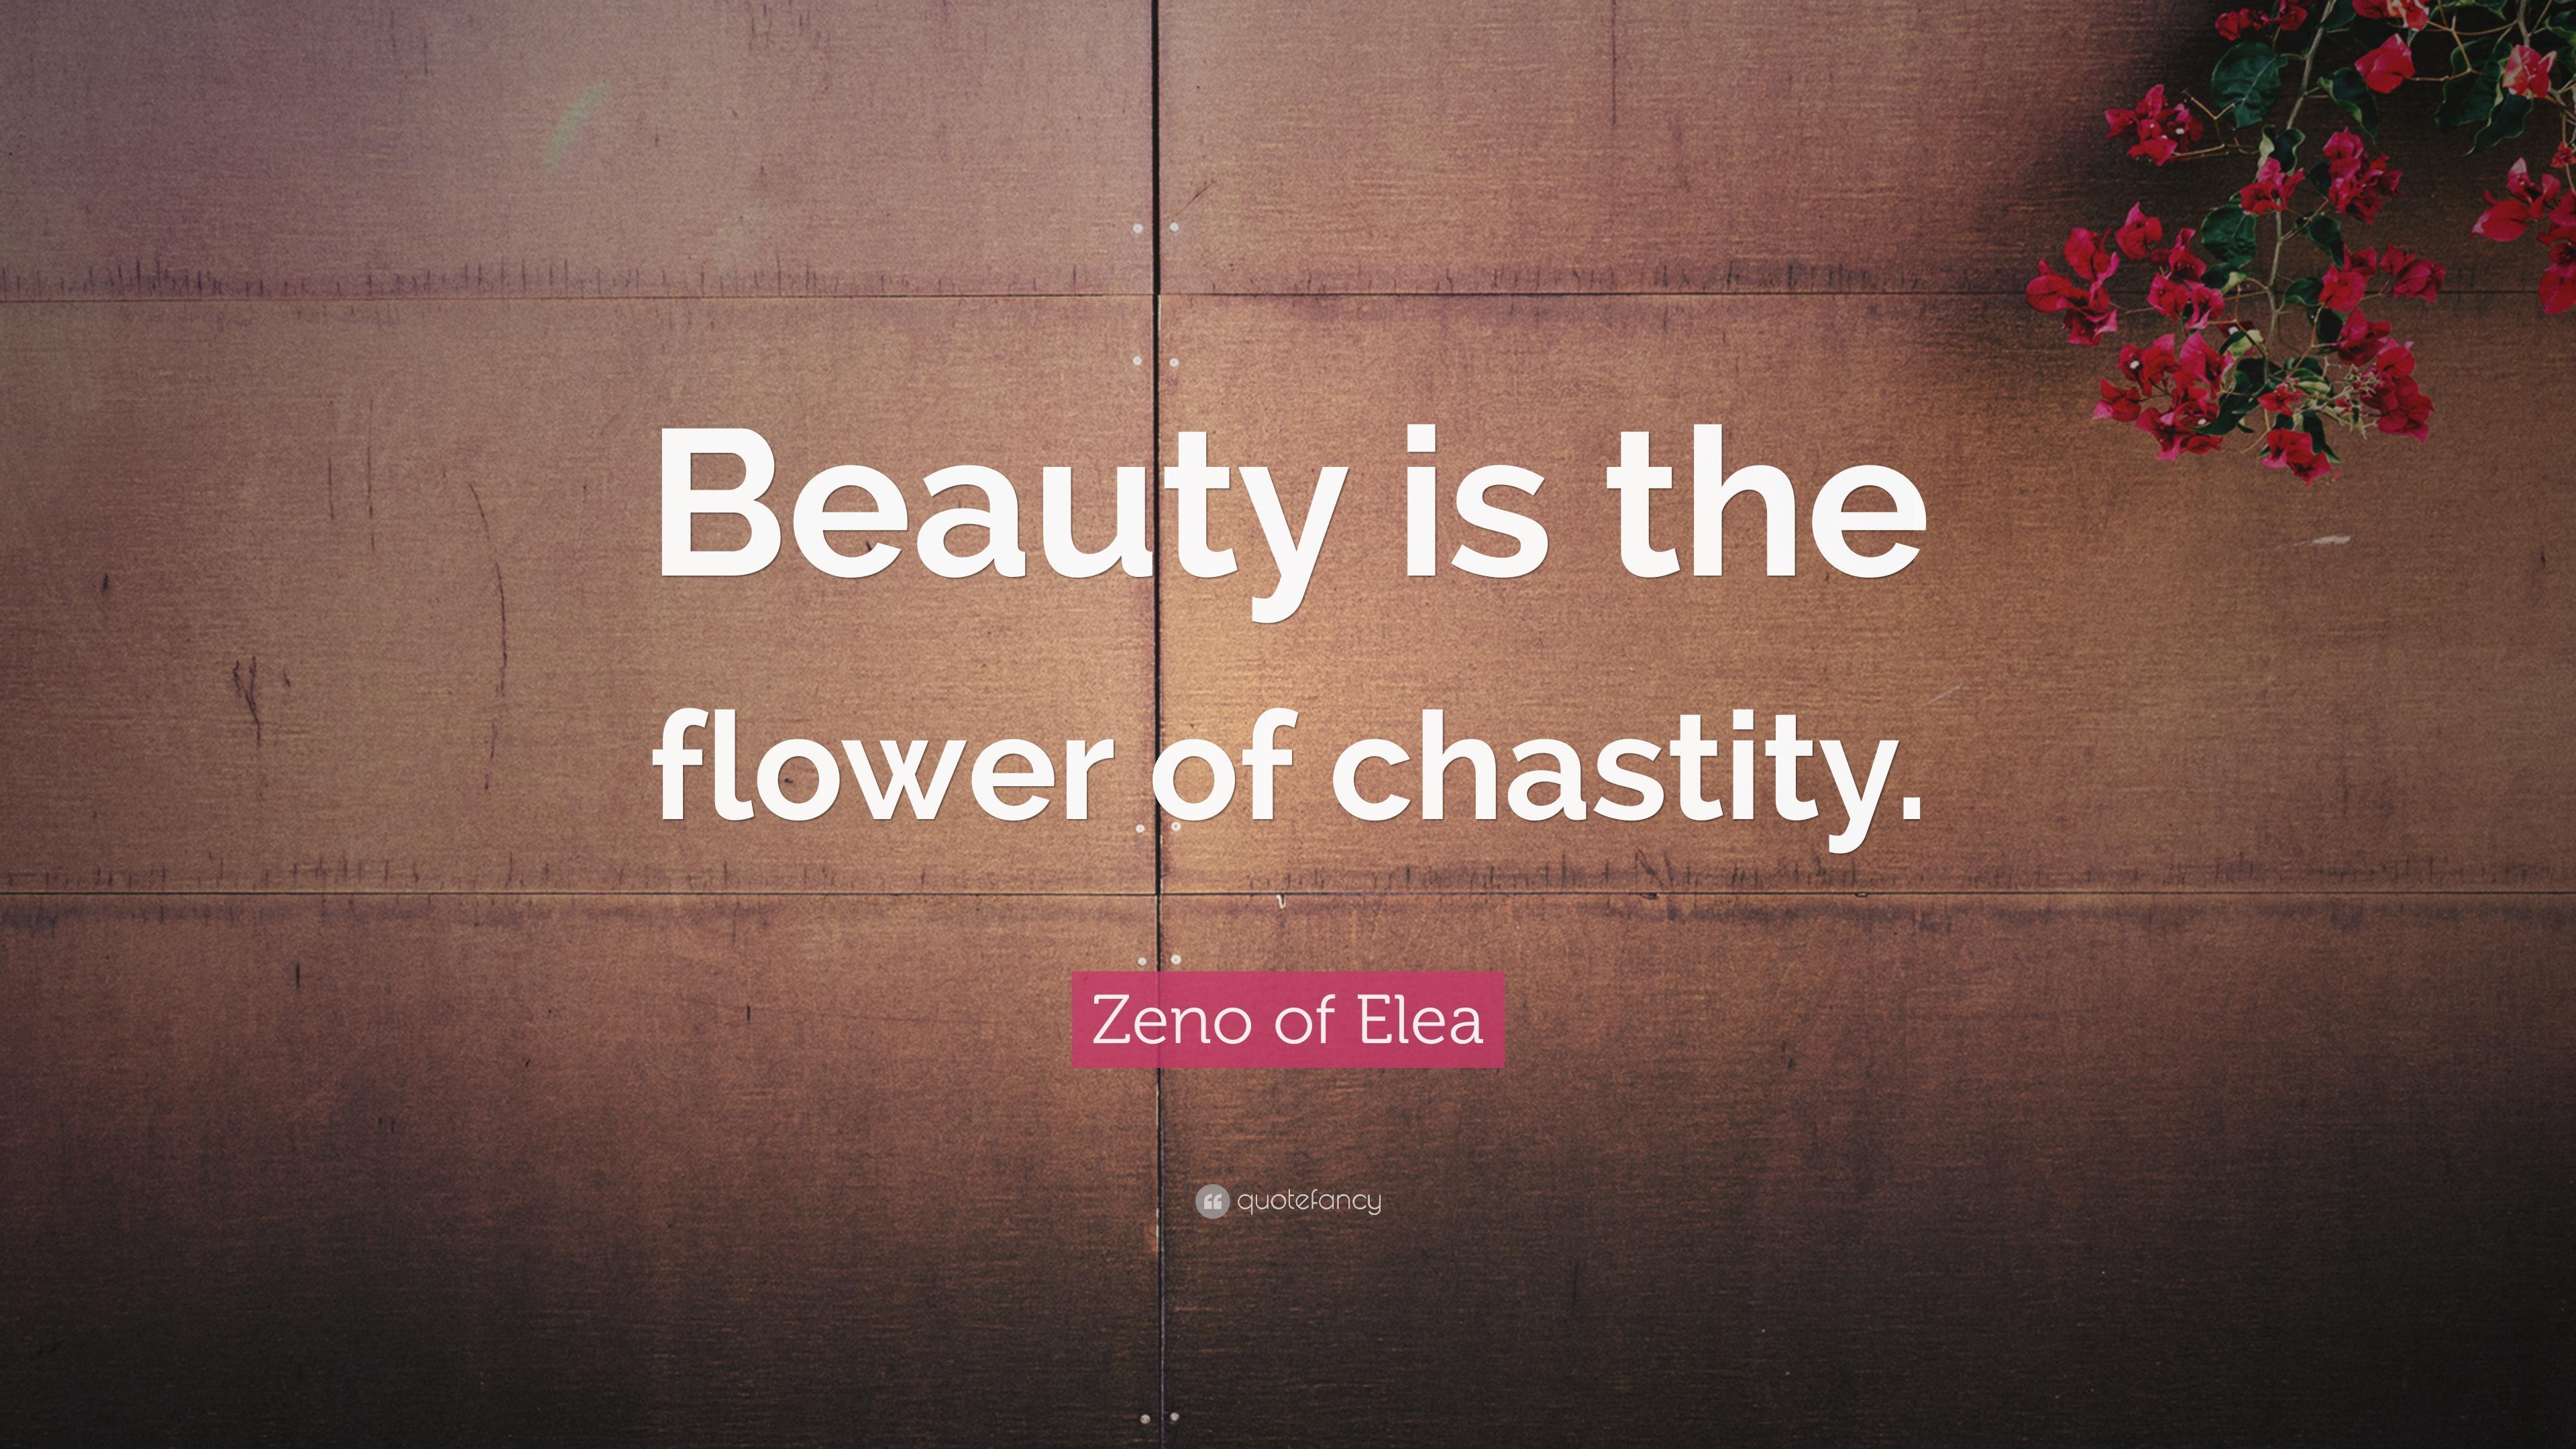 Zeno of Elea Quote: "Beauty is the flower of chastity. 